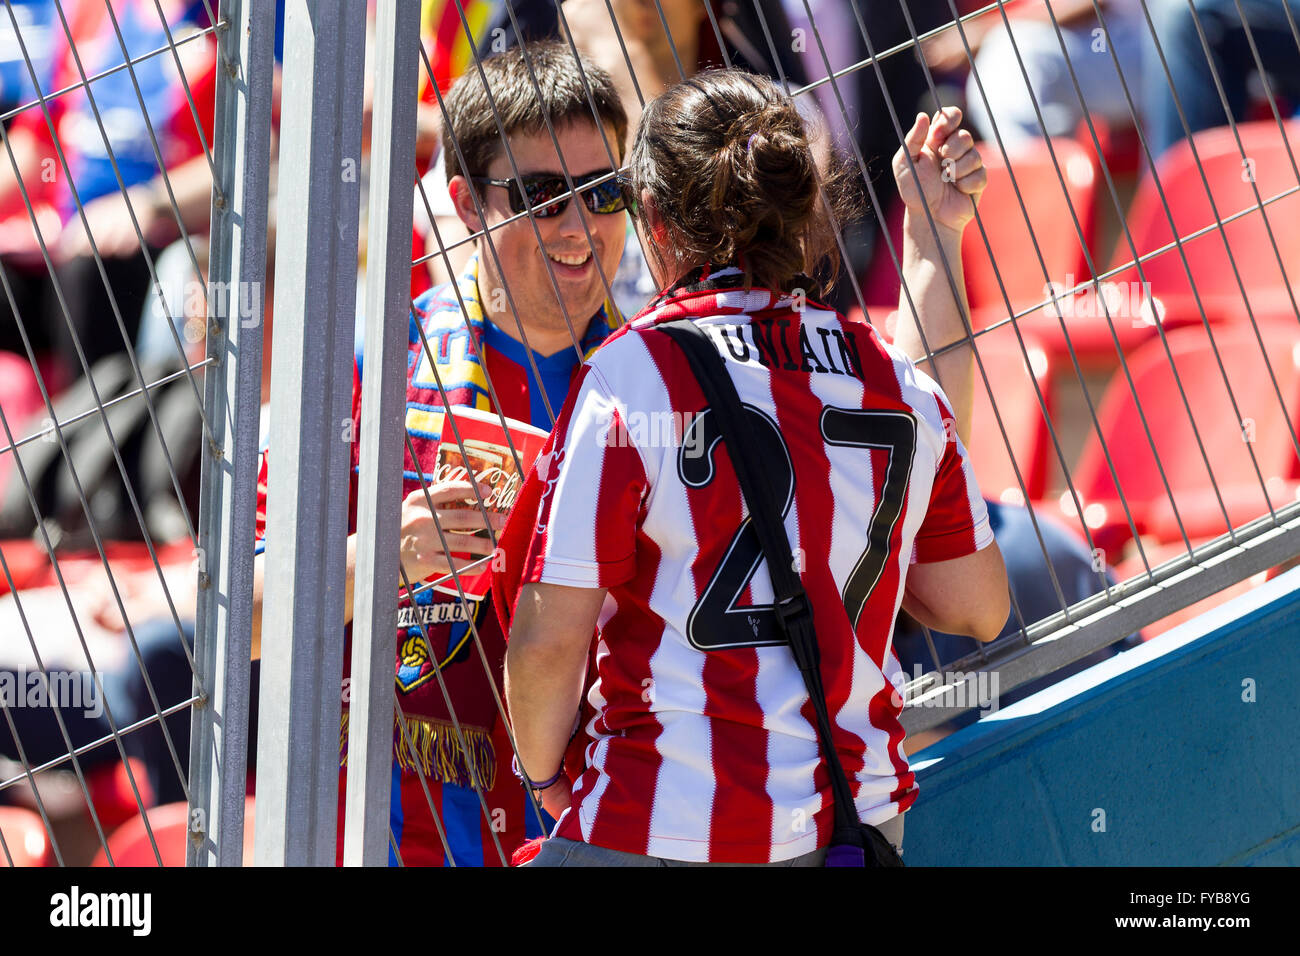 Valencia, Spain. 24th Apr, 2016. Levante ud and Athletic club de bilbao fans during La Liga match between Levante UD and Athletic de Bilbao at Ciutat de Valencia Stadium. Game ends where the Levante and Athletic Bilbao been tied at 2 goals. Credit:  Jose Miguel Fernandez de Velasco/Pacific Press/Alamy Live News Stock Photo